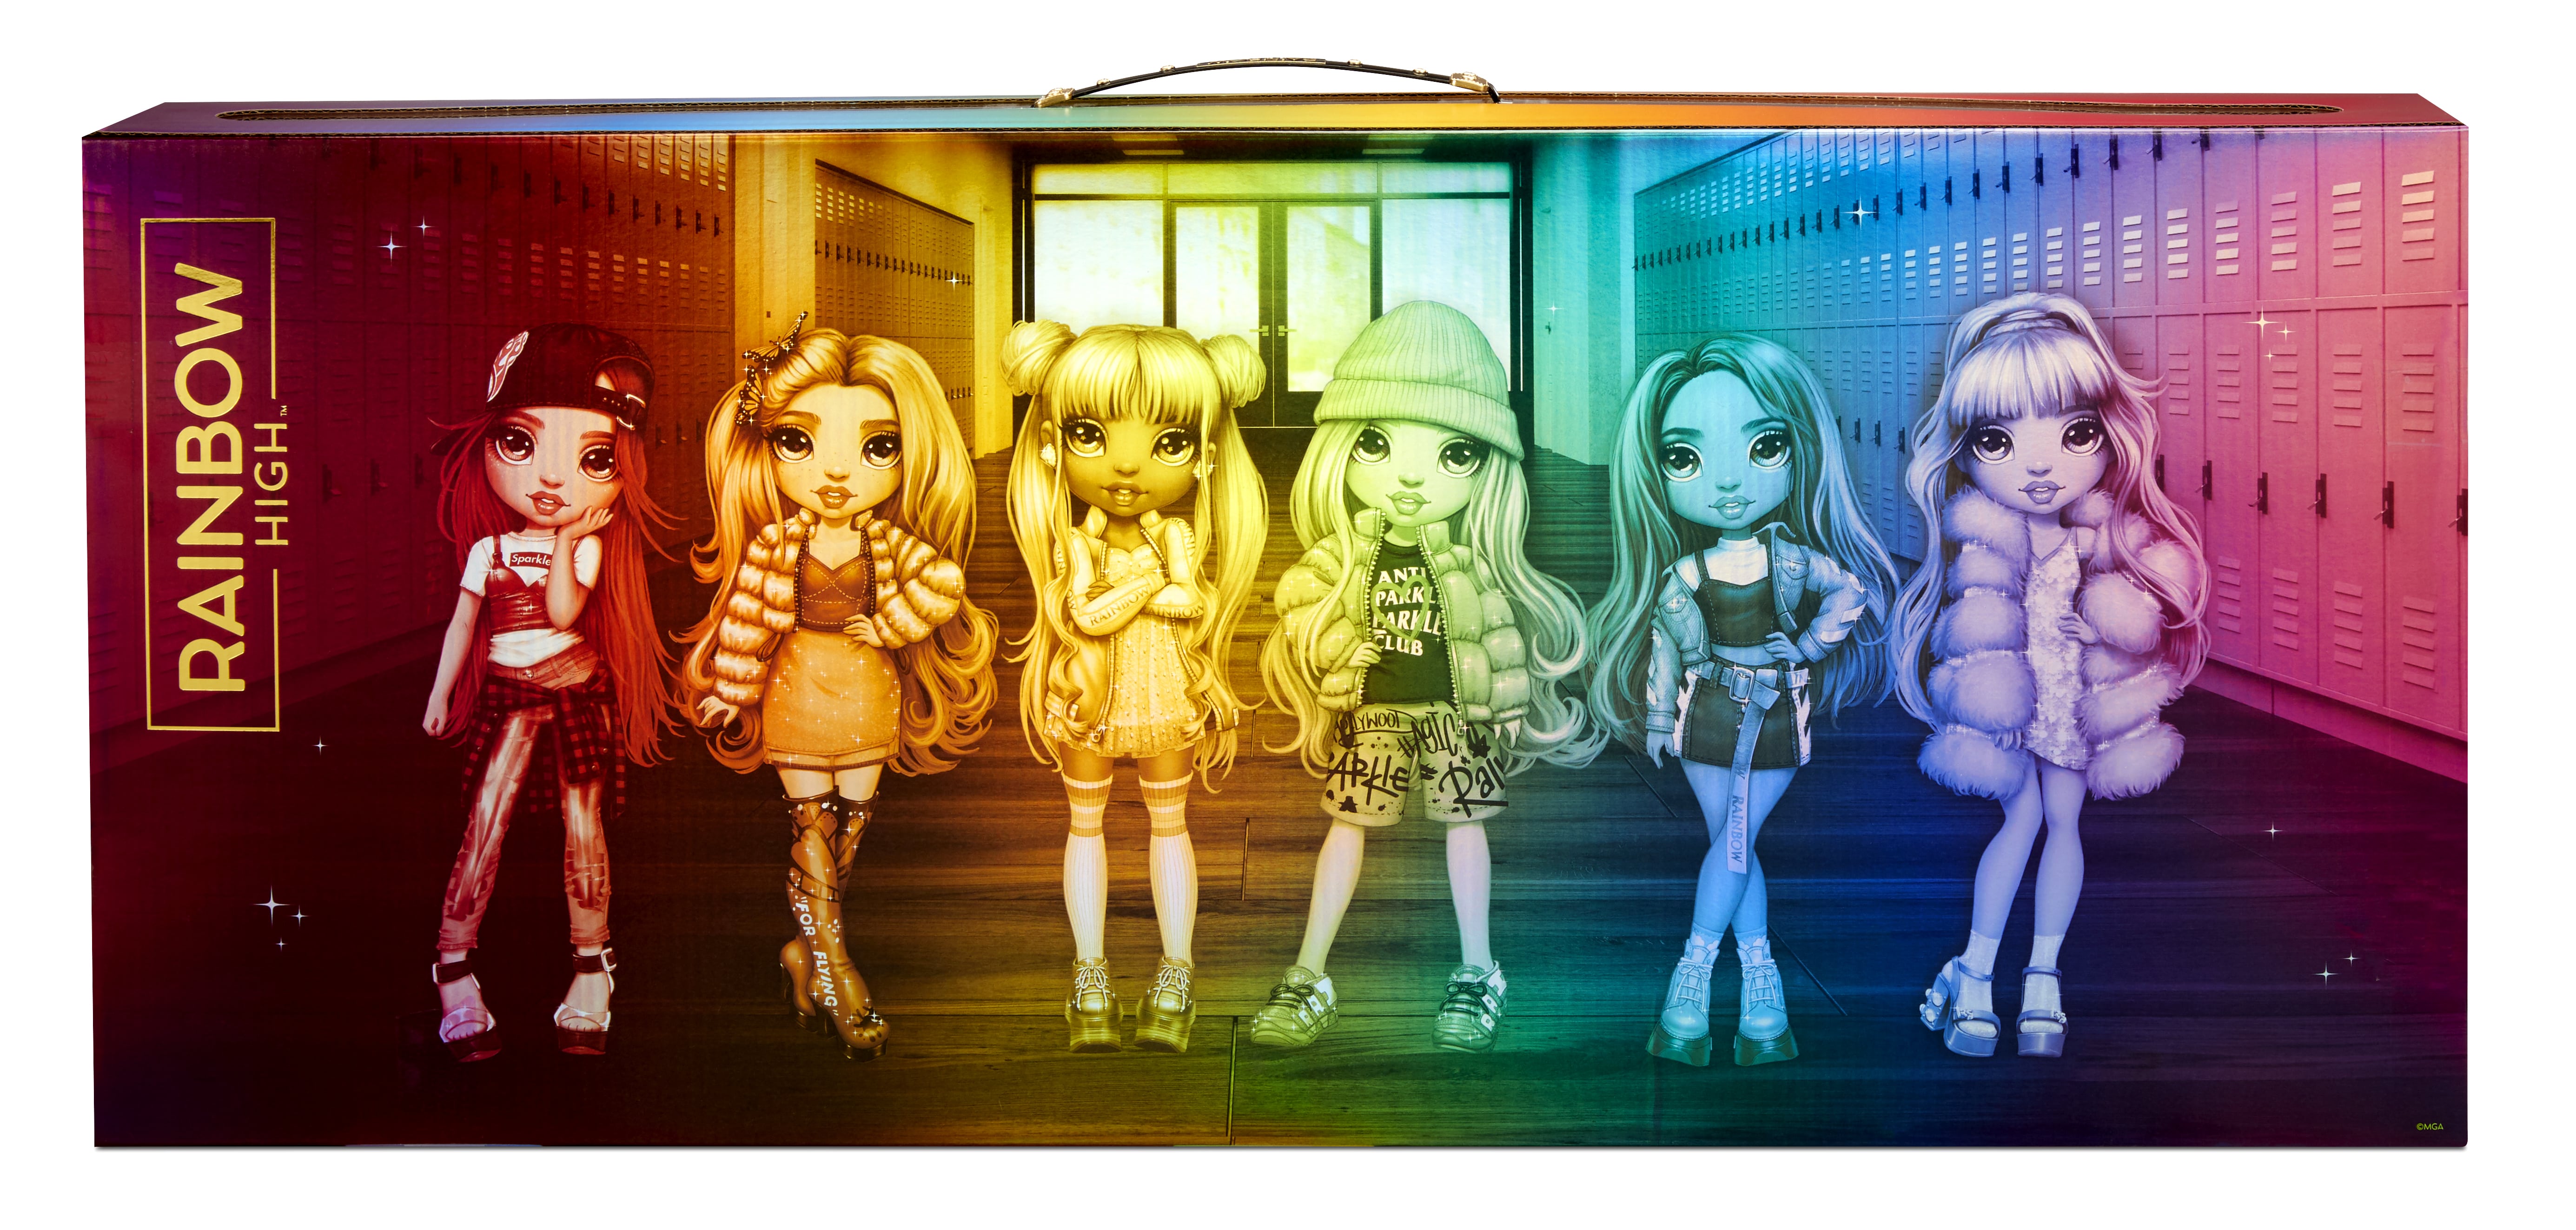 Rainbow High Original Fashion Doll 6-Pack , Violet, Ruby, Sunny, Skyler, Poppy and Jade, 11-inch Poseable Fashion Doll, Includes 6 Outfits, 6 Pairs of Shoes and accessories. Great Gift and Toy for Kid - image 5 of 5